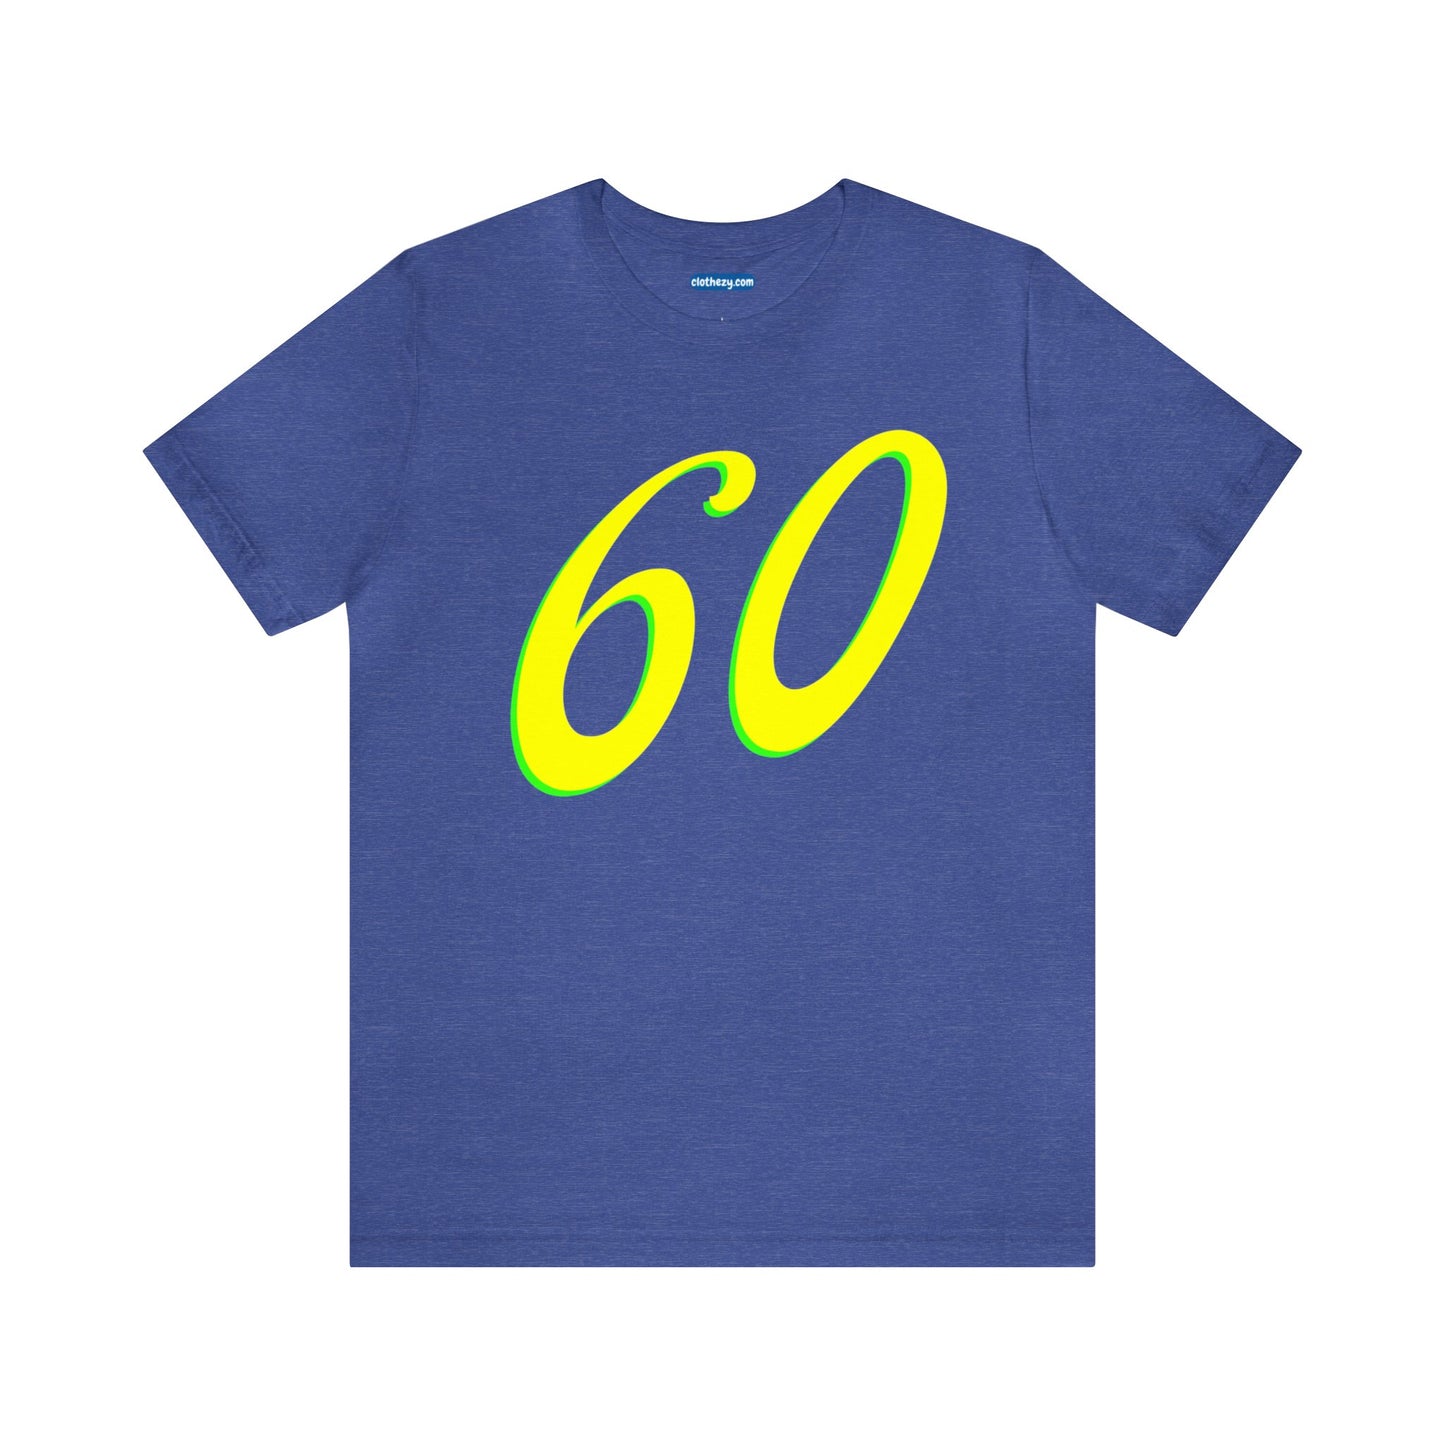 Number 60 Design - Soft Cotton Tee for birthdays and celebrations, Gift for friends and family, Multiple Options by clothezy.com in Royal Blue Heather Size Small - Buy Now